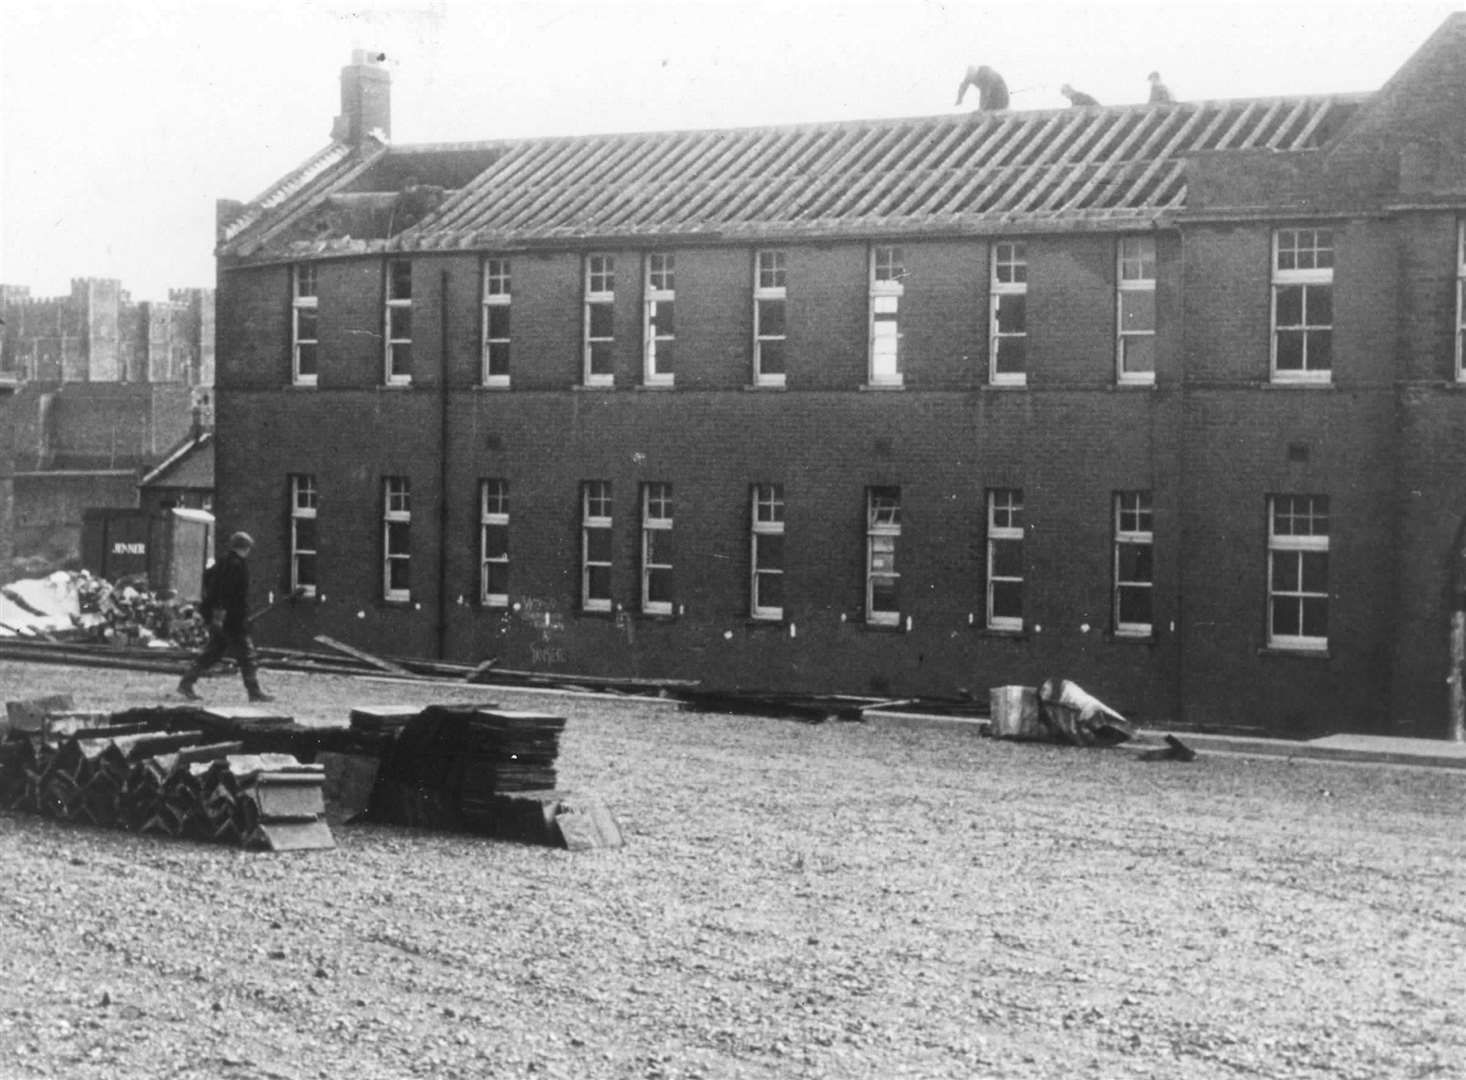 Connaught Barracks in Dover pictured in April 1966